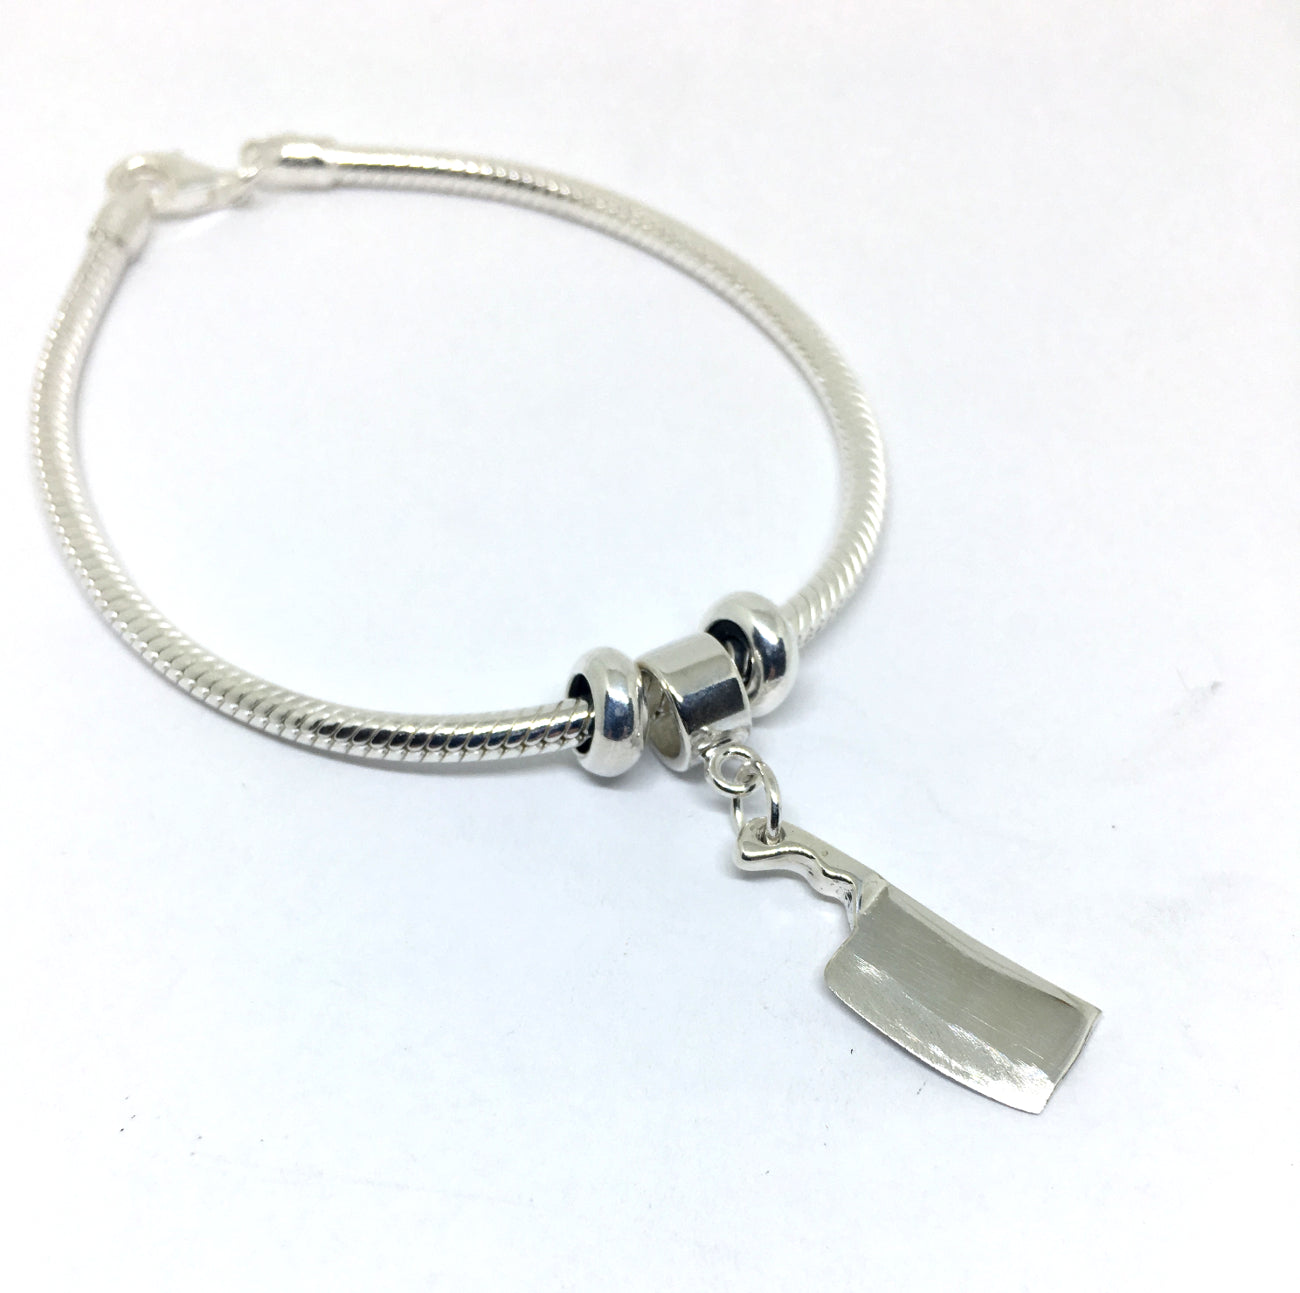 Chef Cleaver Charm Bracelet with Snake Chain